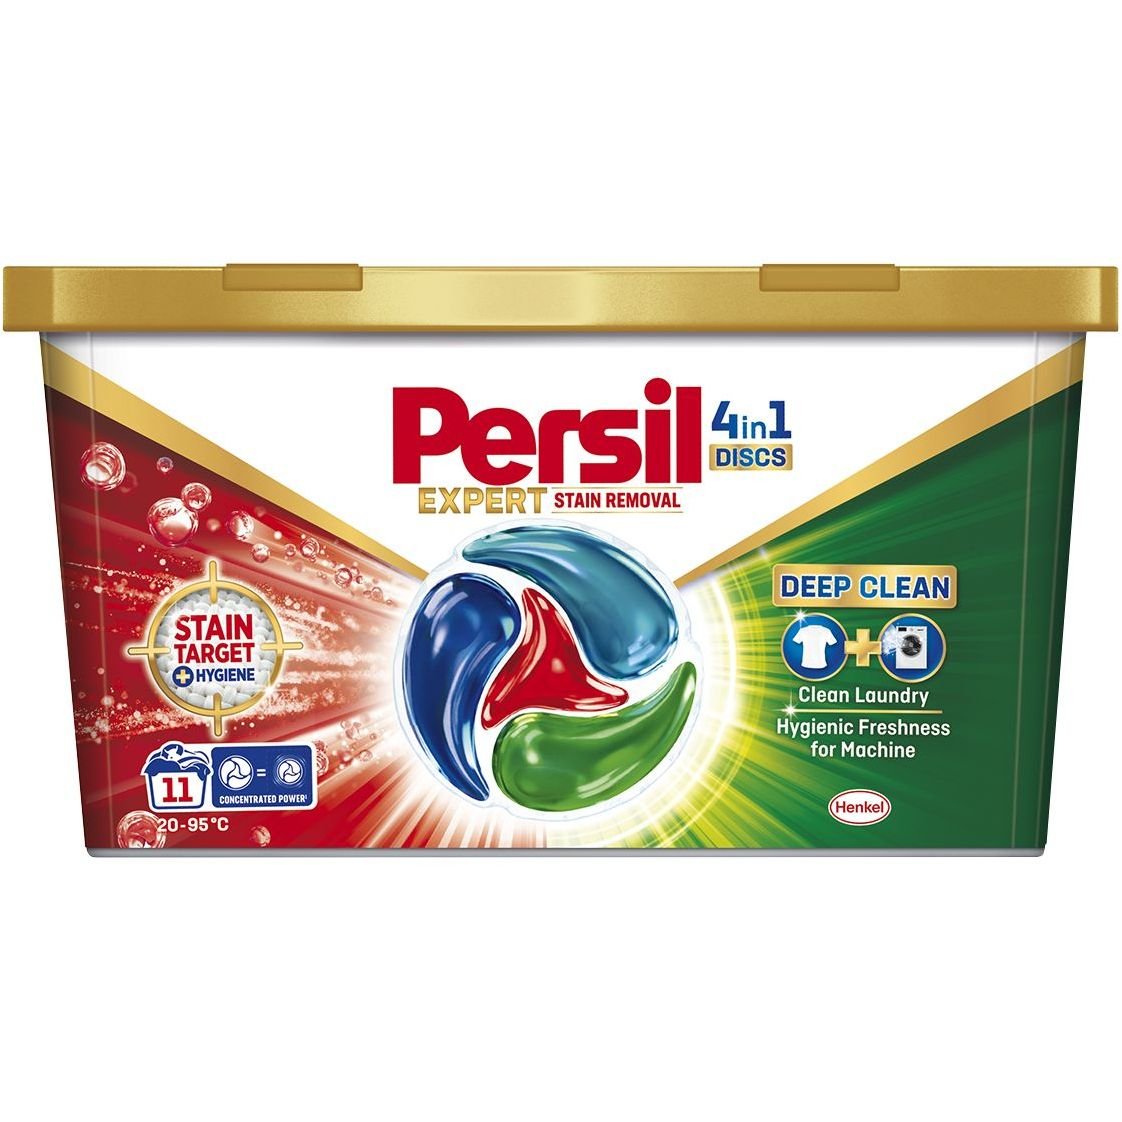 Photos - Laundry Detergent Persil Диски для прання  Expert Deep Clean Stain Removal 4 in 1 Discs 11 шт 